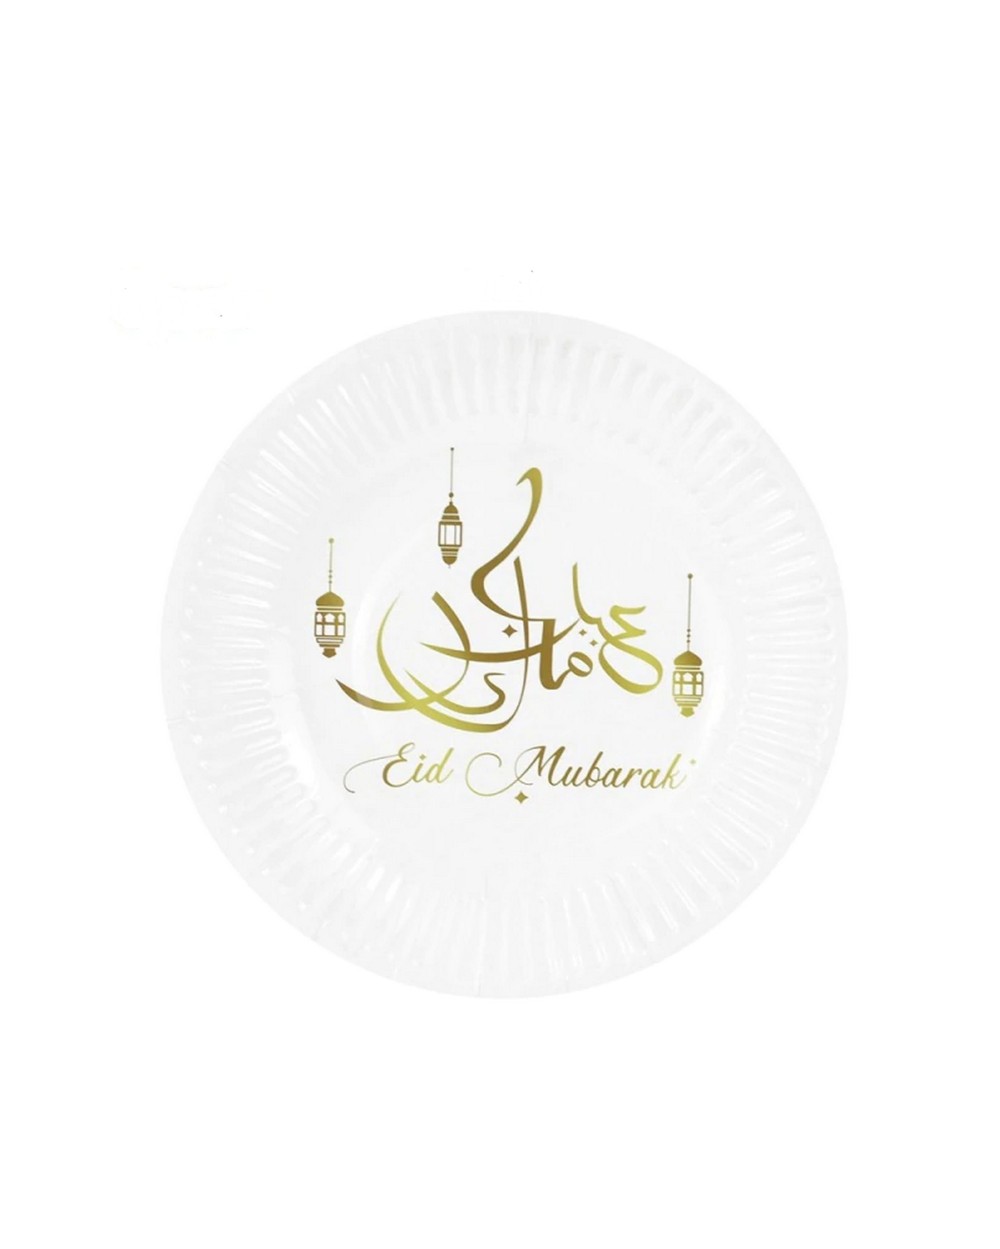 Set of 6 plates and glasses with Eid Mubarak calligraphy